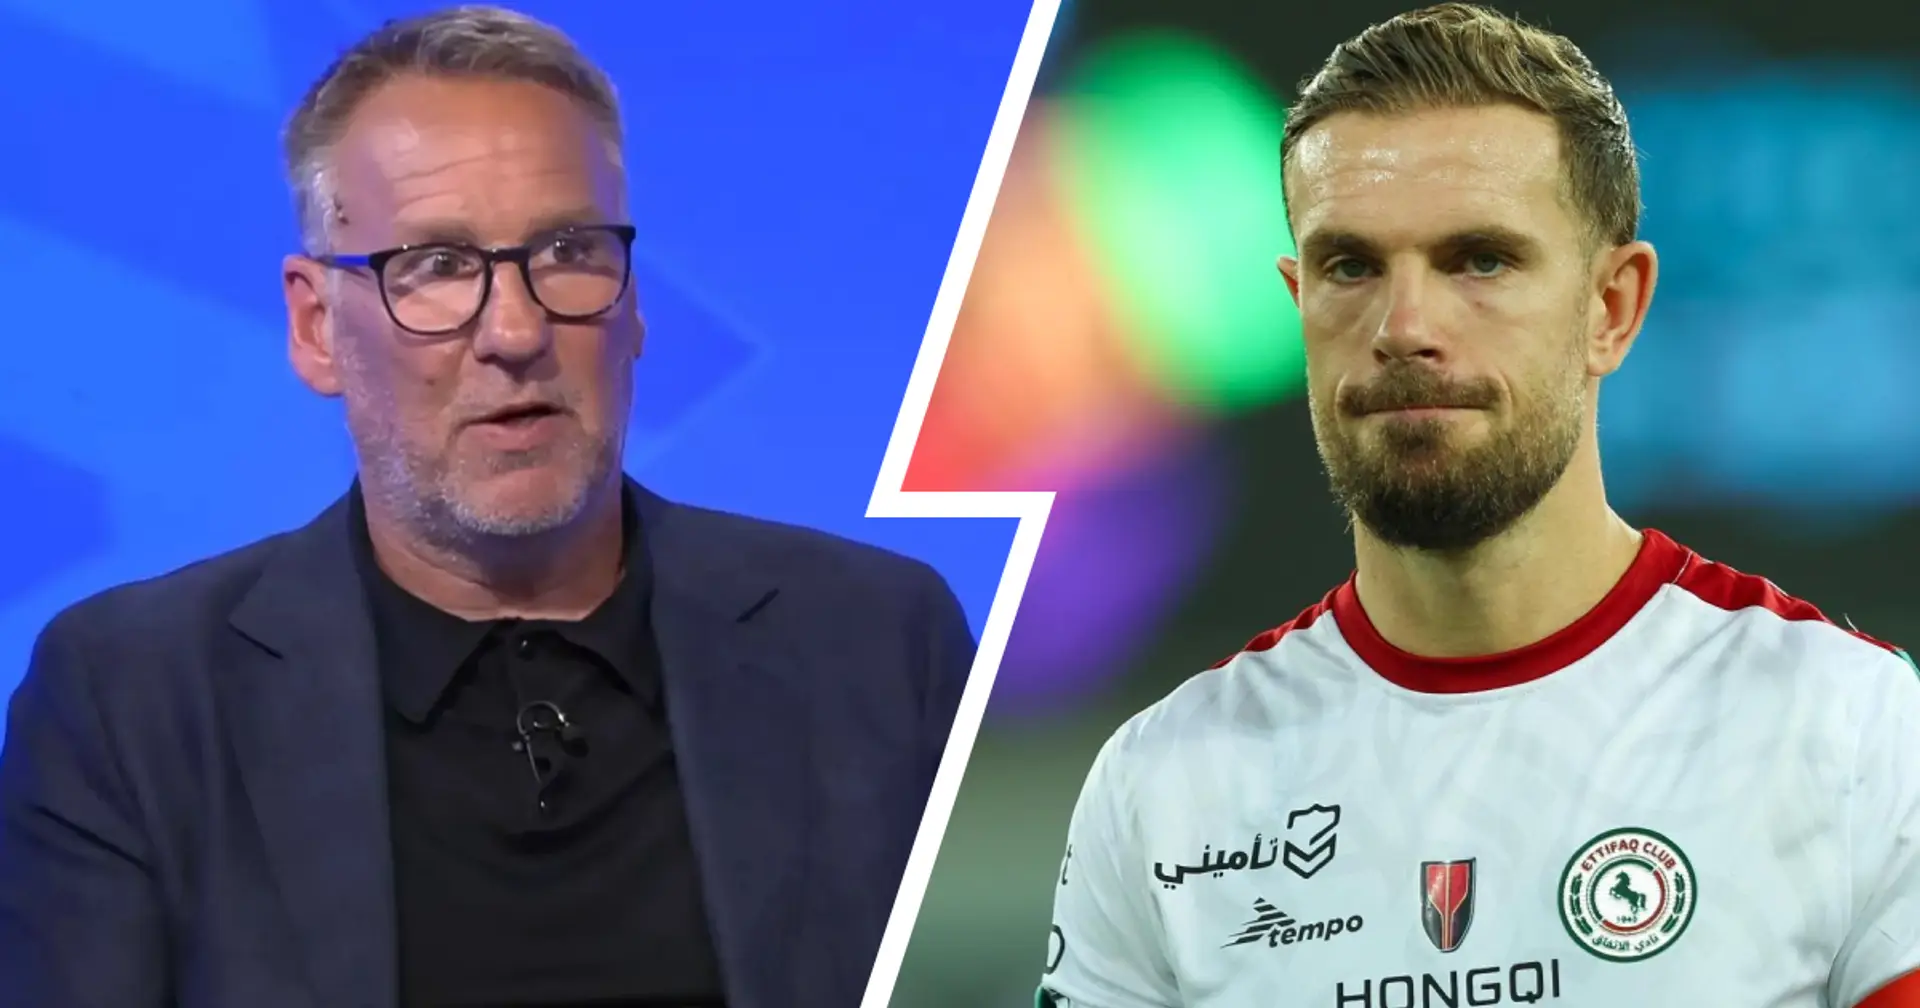 'Why would it work?': Jordan Henderson told he has only himself to blame for ill-judged Liverpool exit